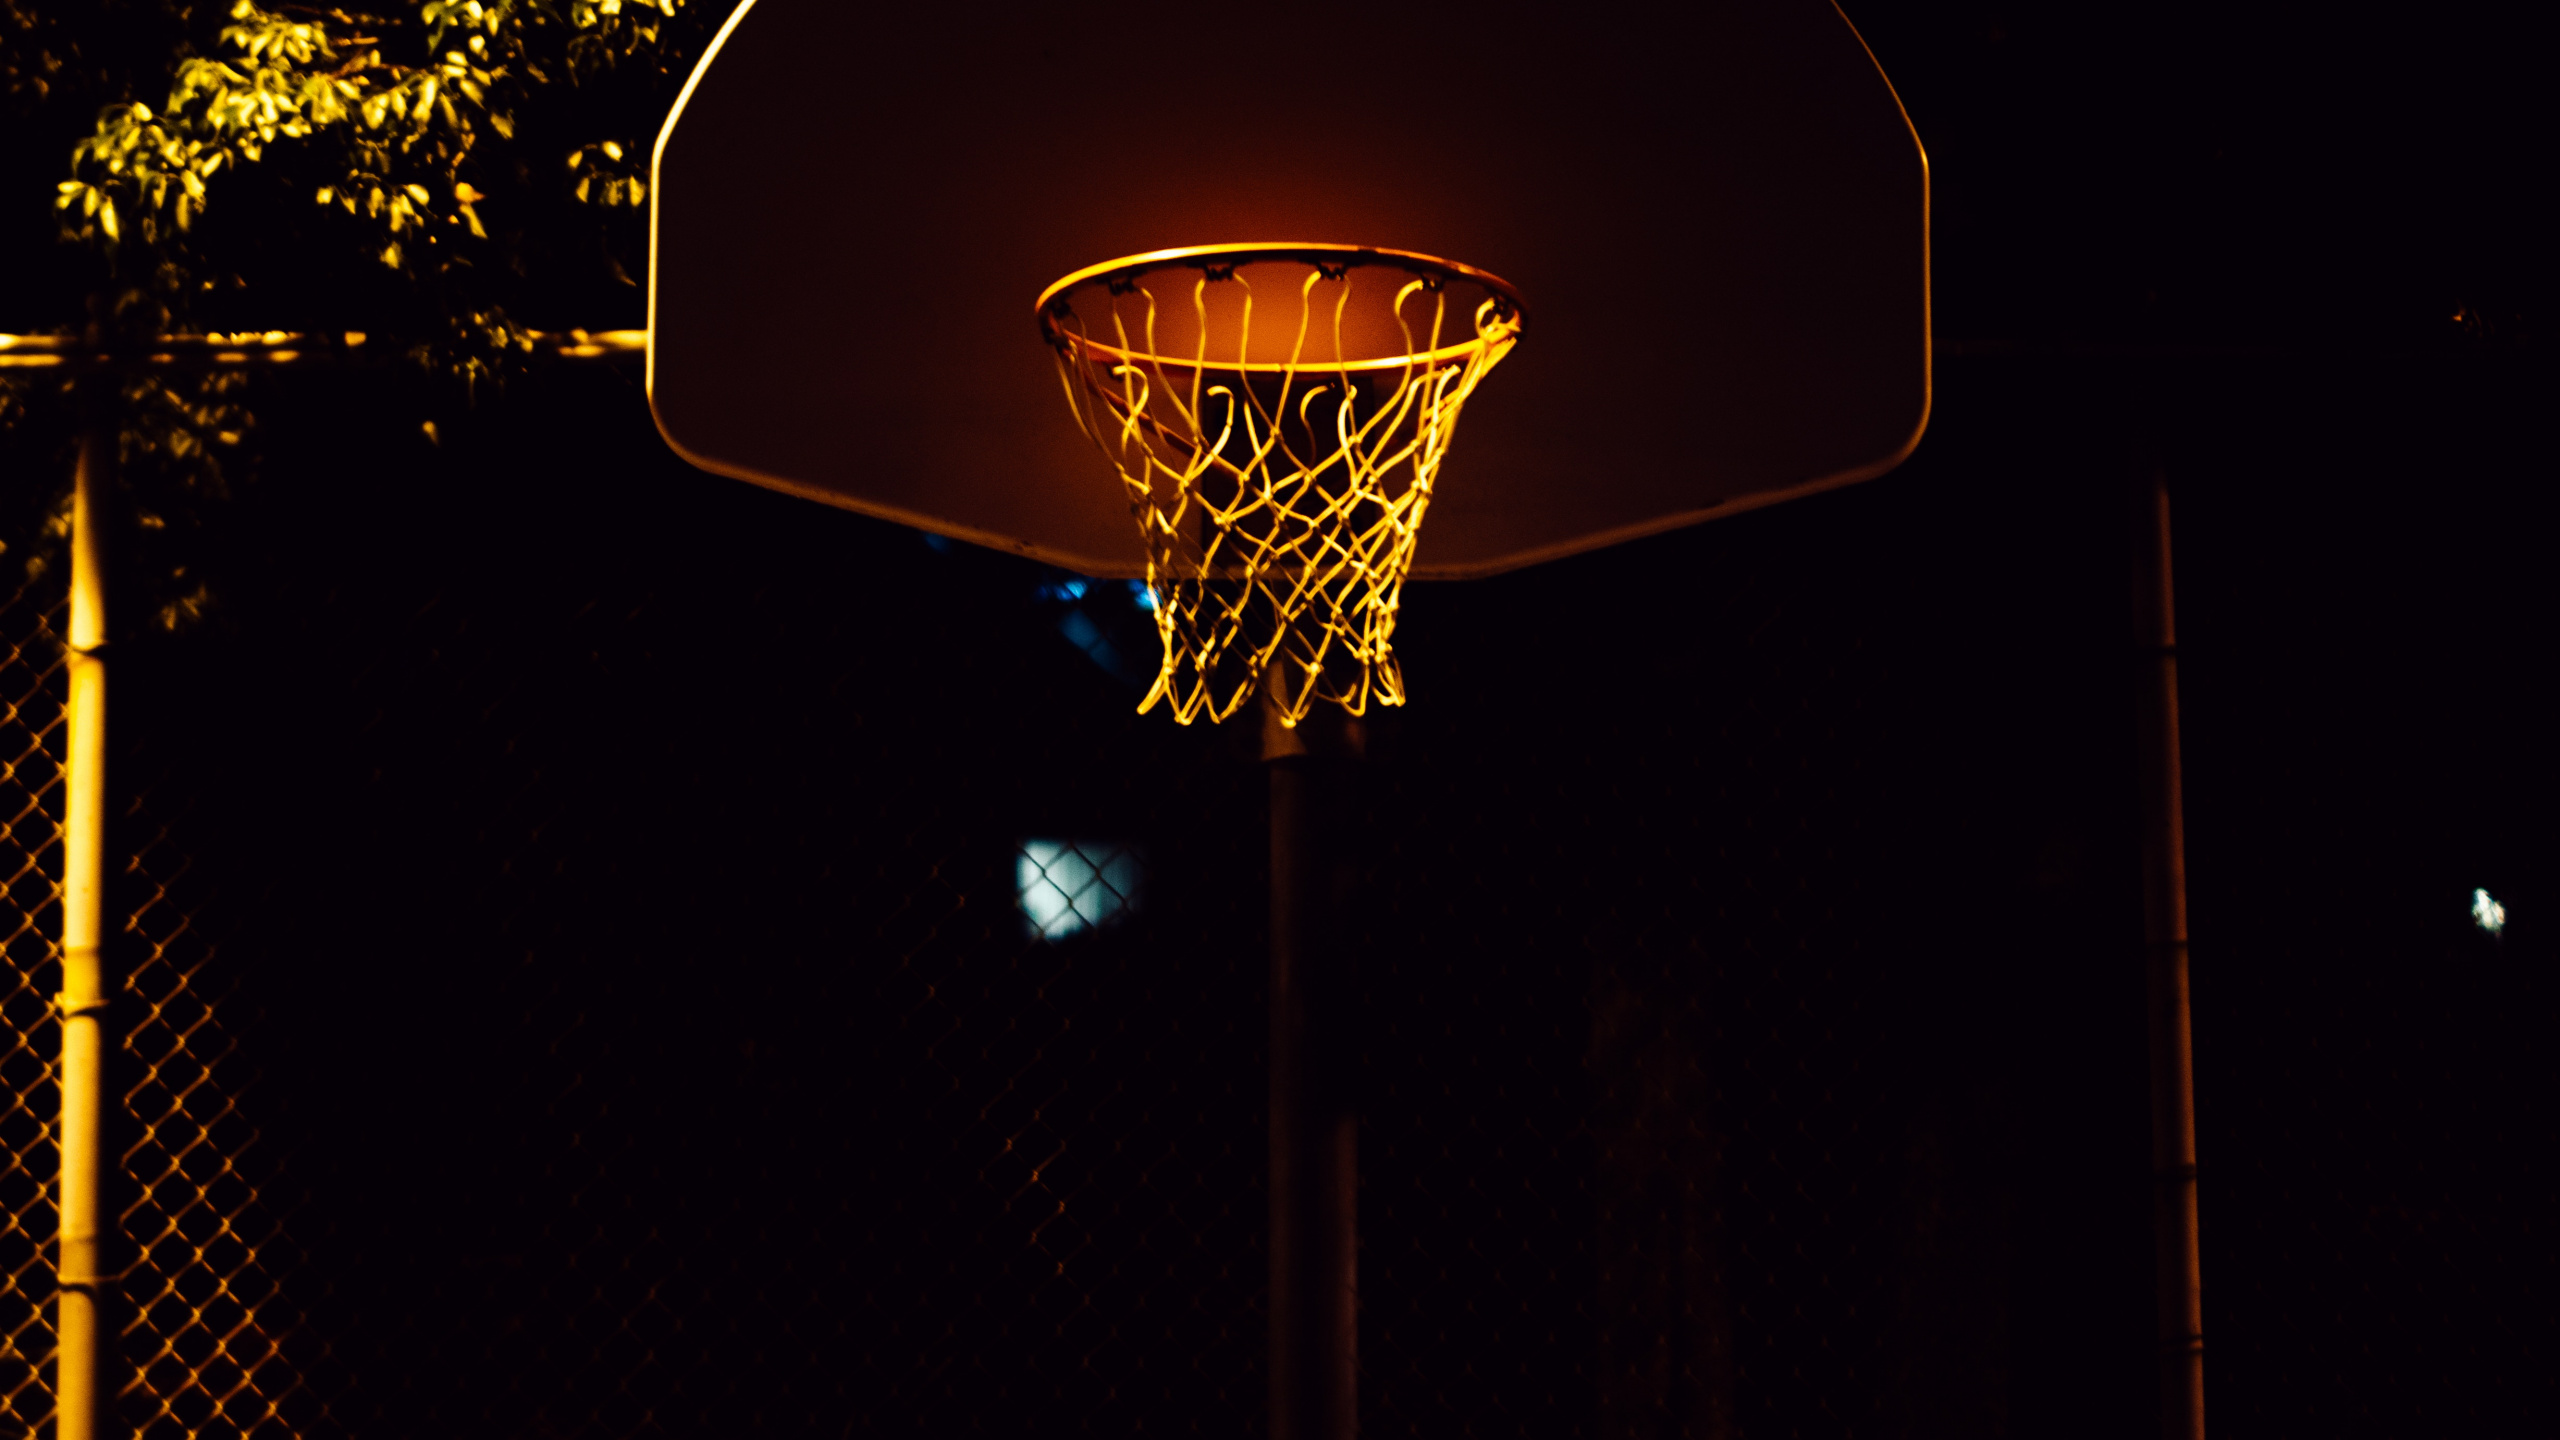 Basketball Hoop With Light Turned on During Night Time. Wallpaper in 2560x1440 Resolution